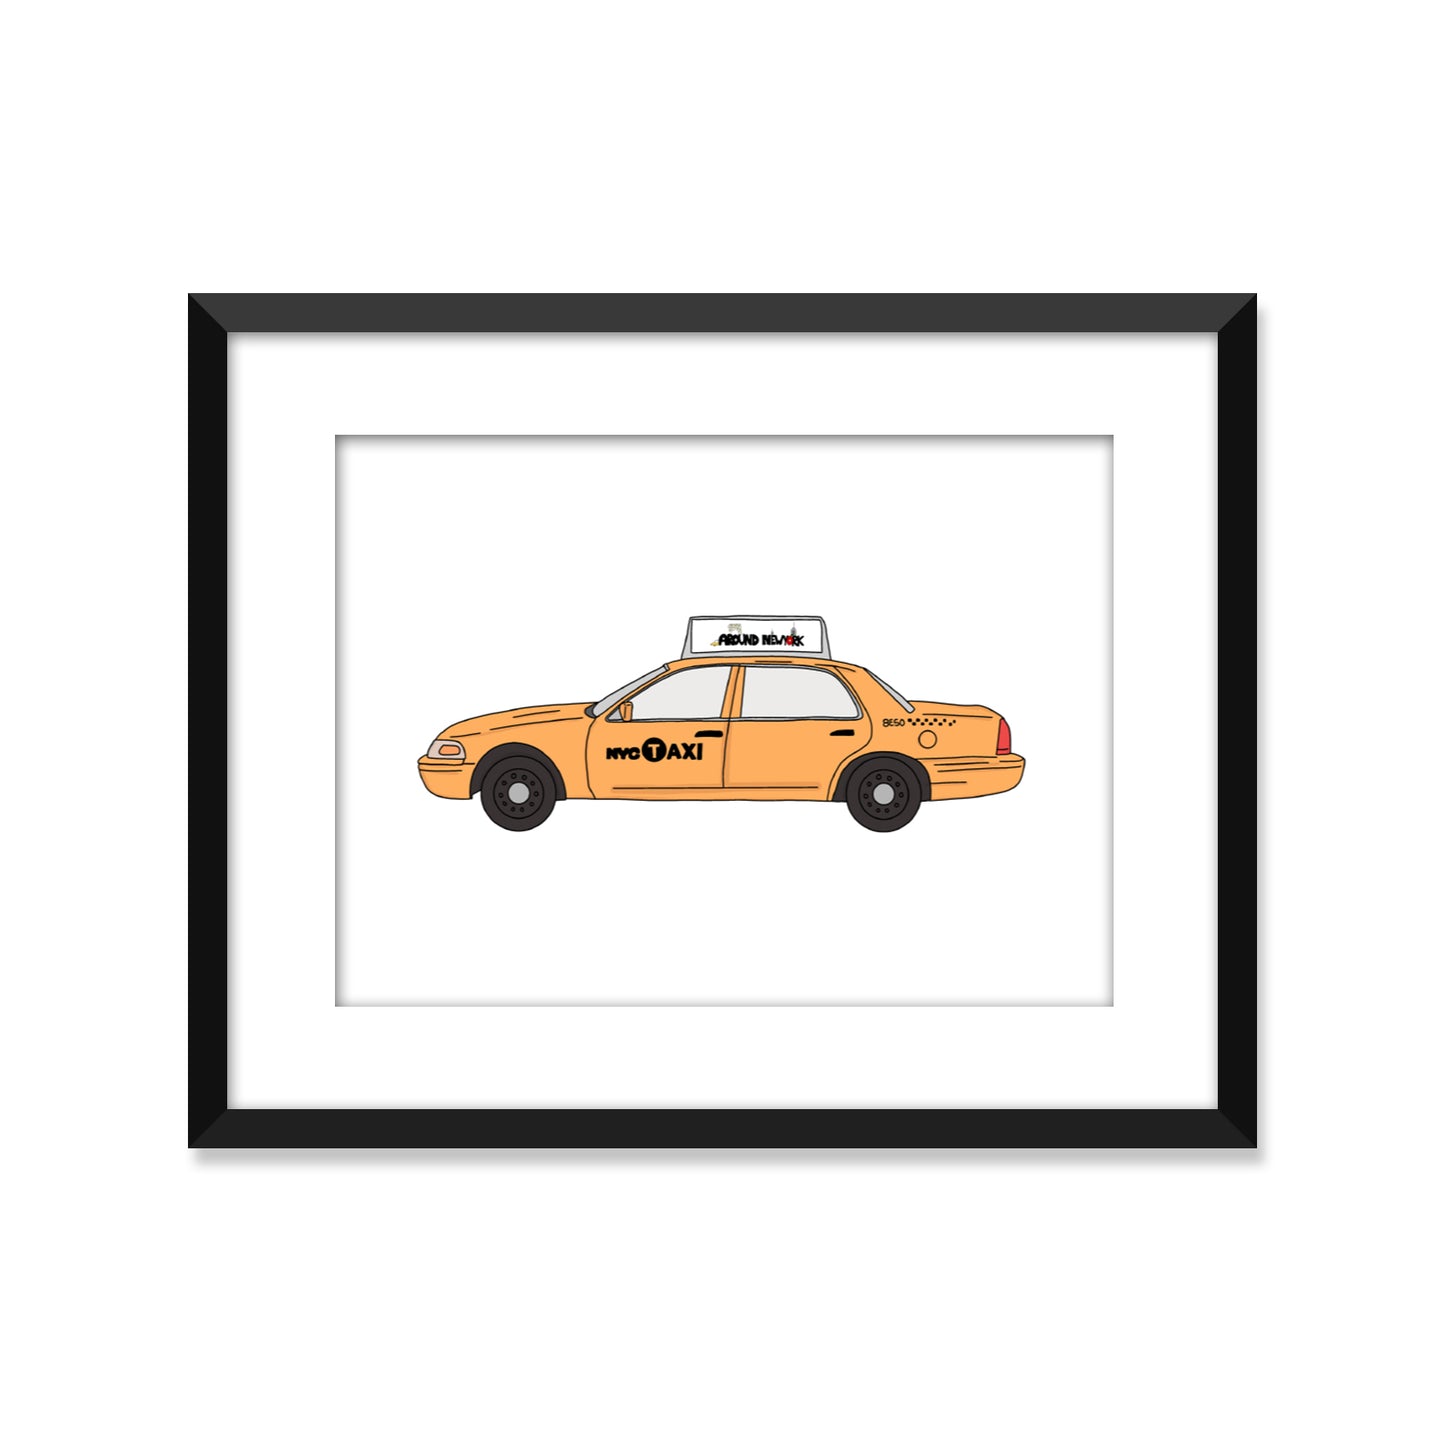 Around New York Taxi - Unframed Art Print Or Greeting Card